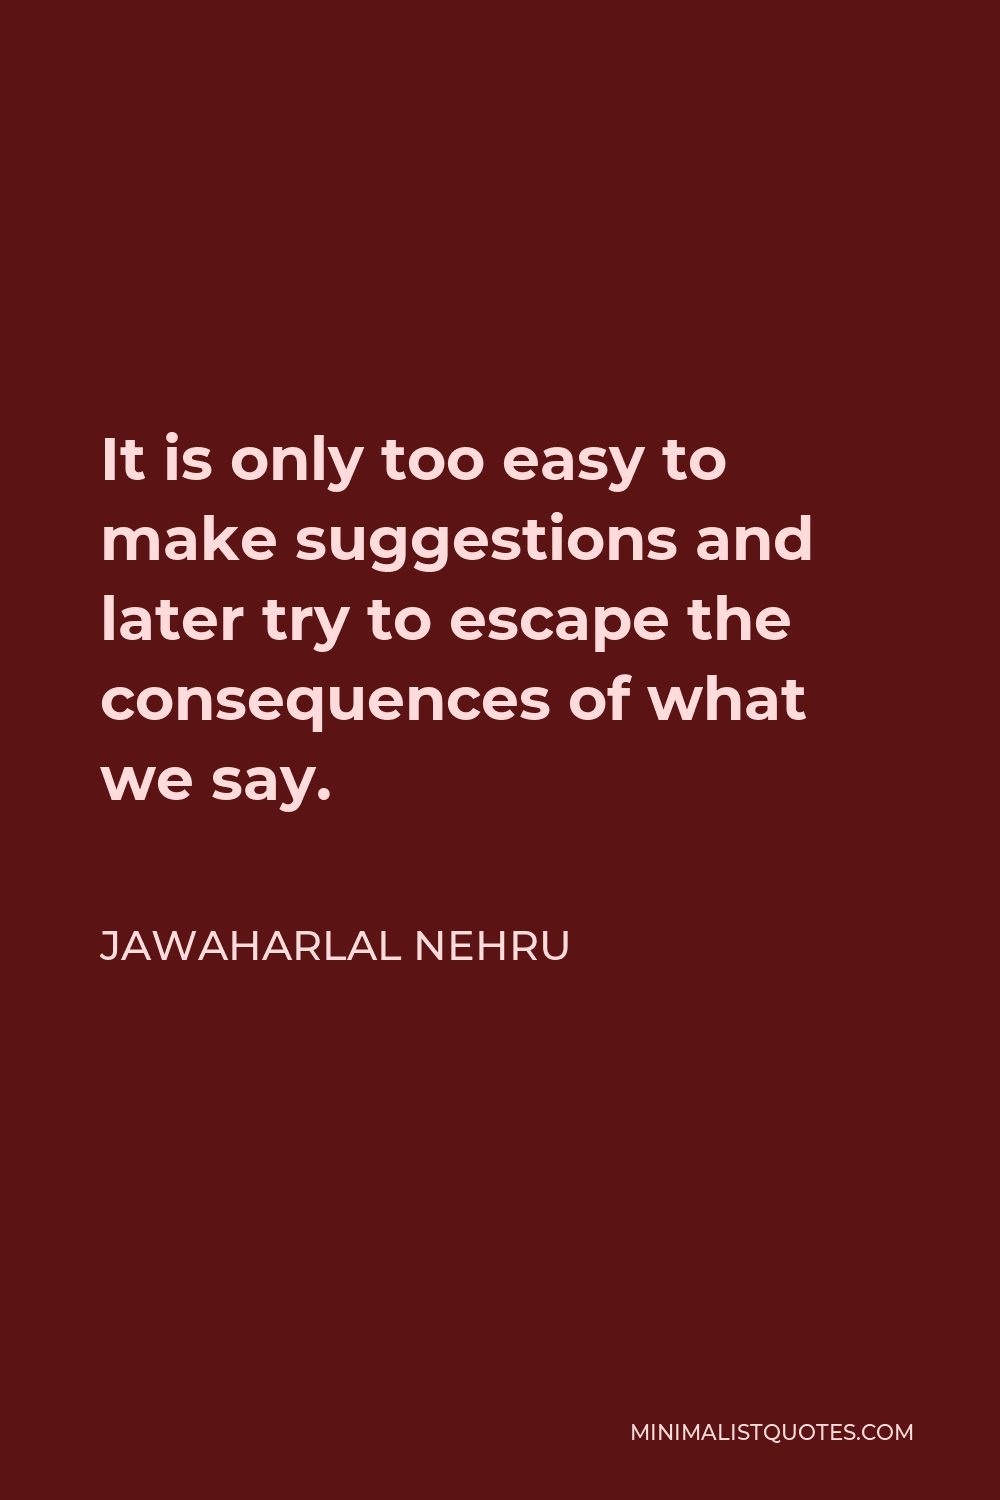 Jawaharlal Nehru Quote - It is only too easy to make suggestions and later try to escape the consequences of what we say.